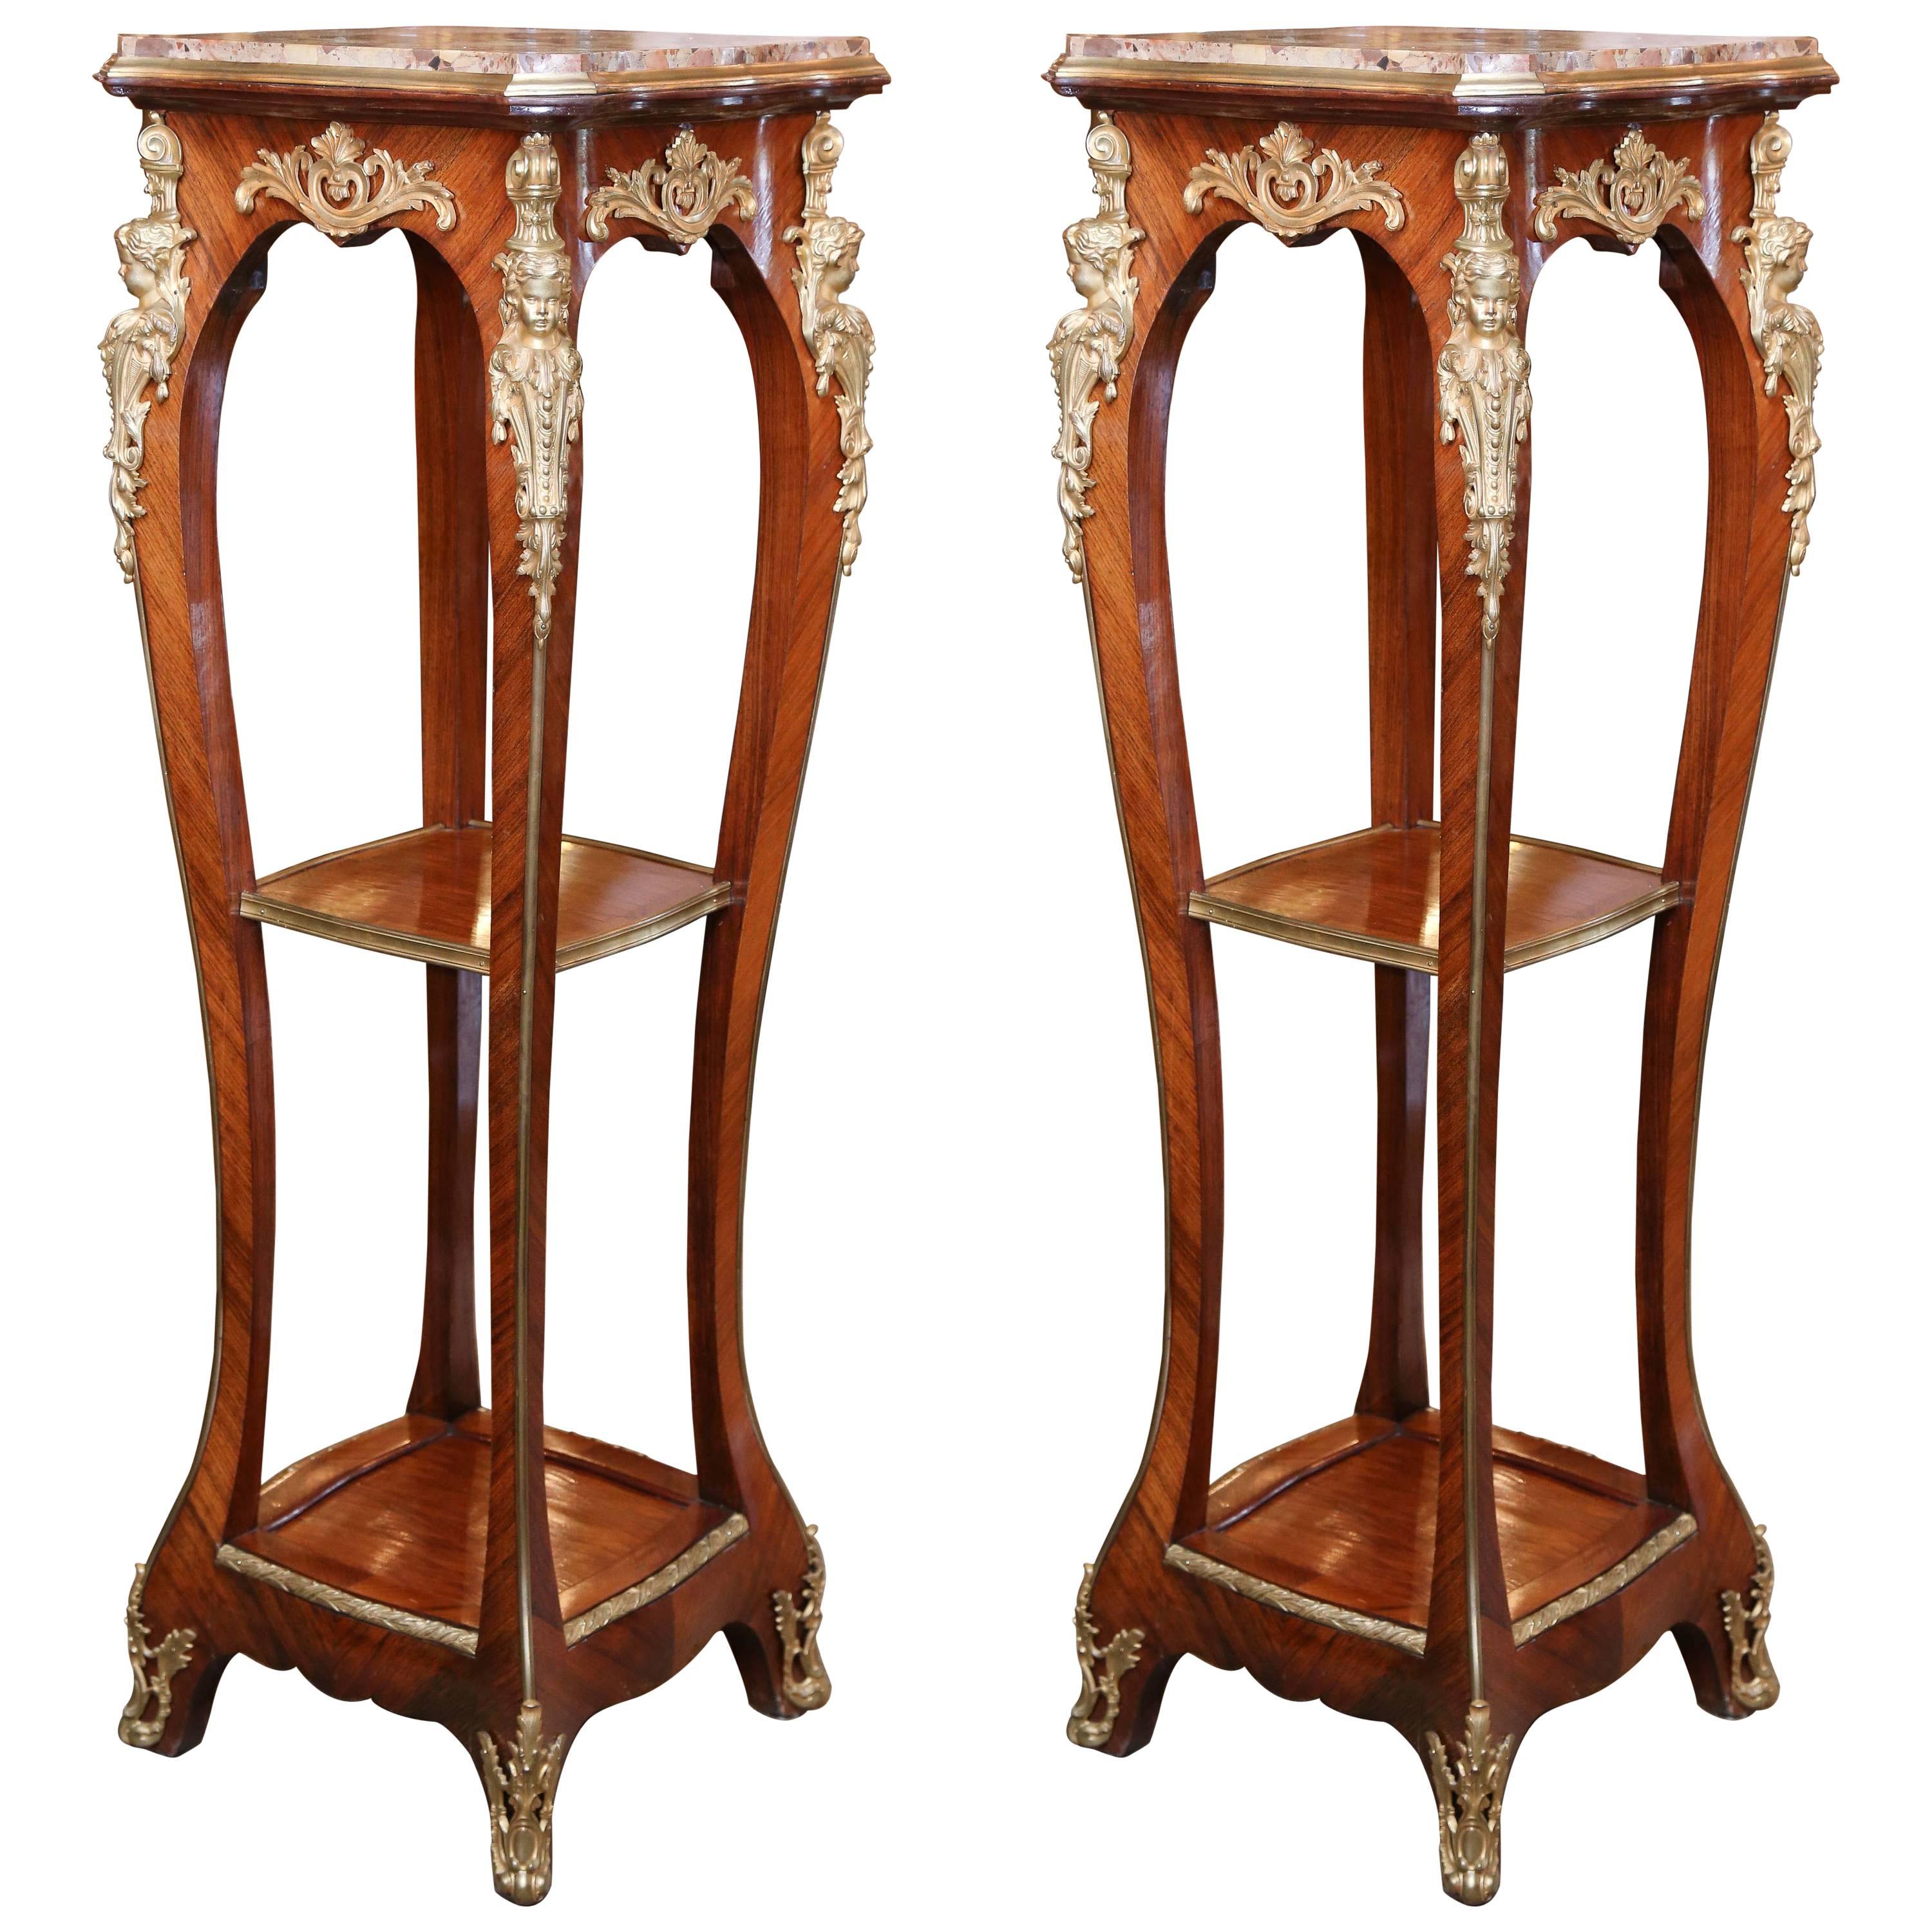 Pair of Tall French Marble-Top Pedestals with Ormolu Mounts and Cabriole Legs For Sale